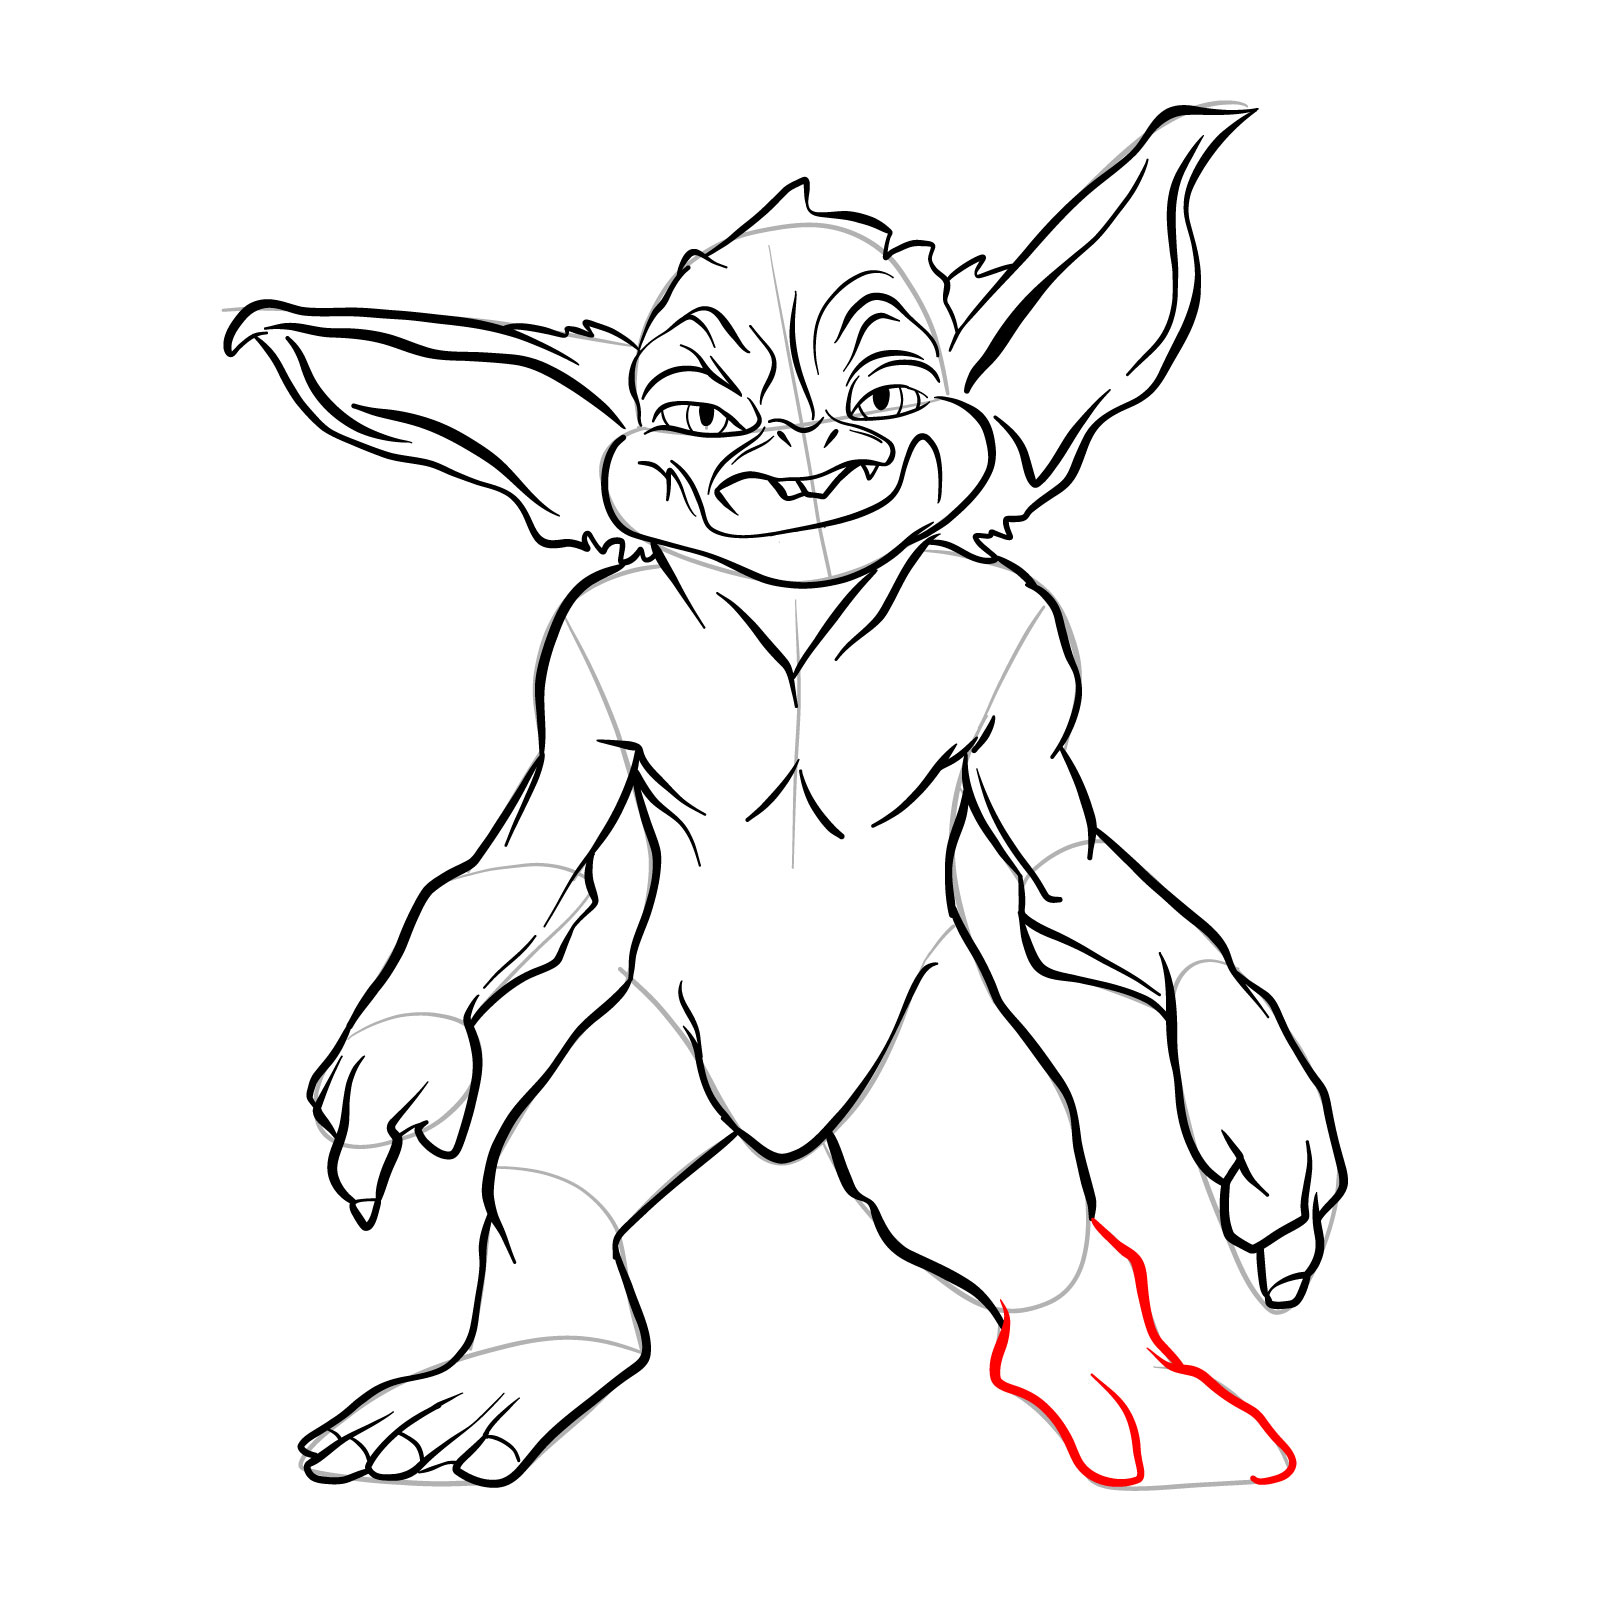 How to draw a Goblin - step 27